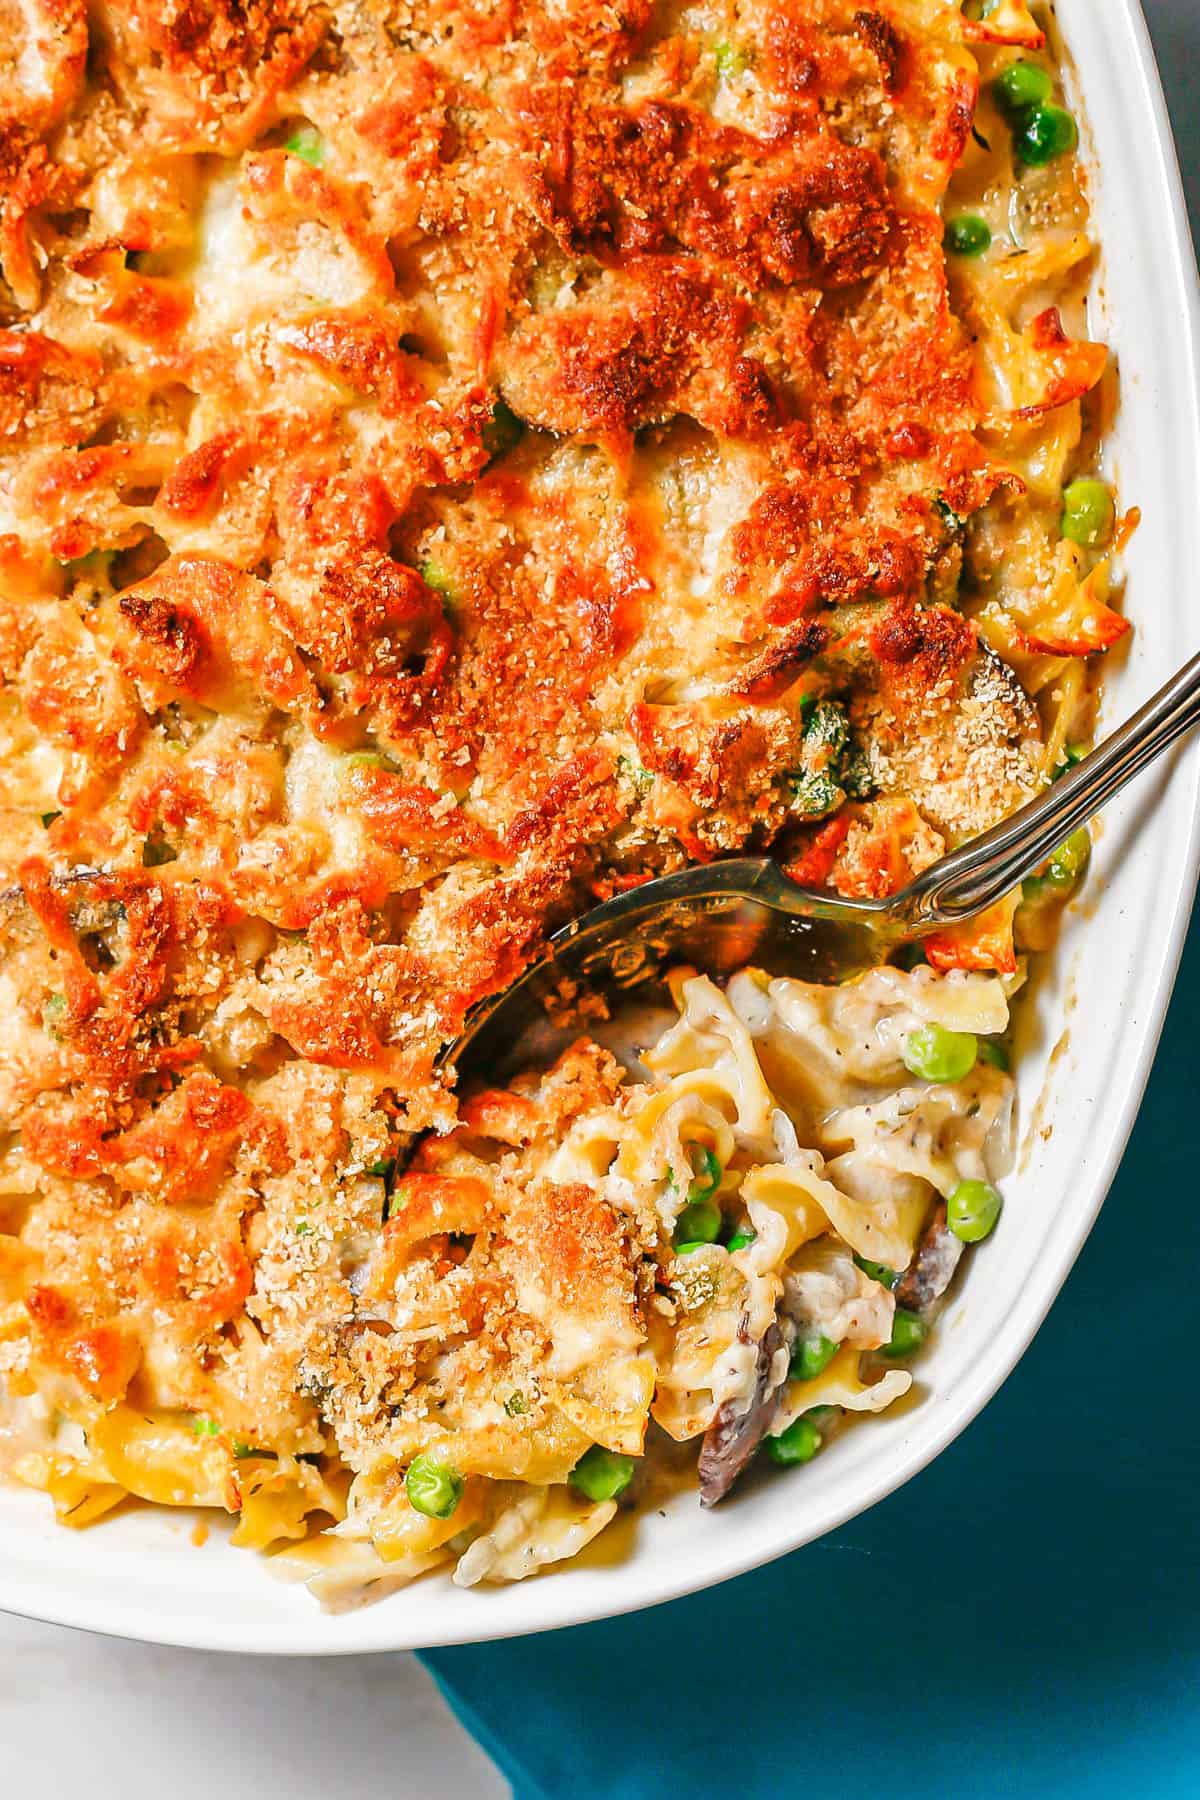 A silver serving spoon resting in a baked casserole dish of tuna noodle casserole topped with a crunchy breadcrumb crust.